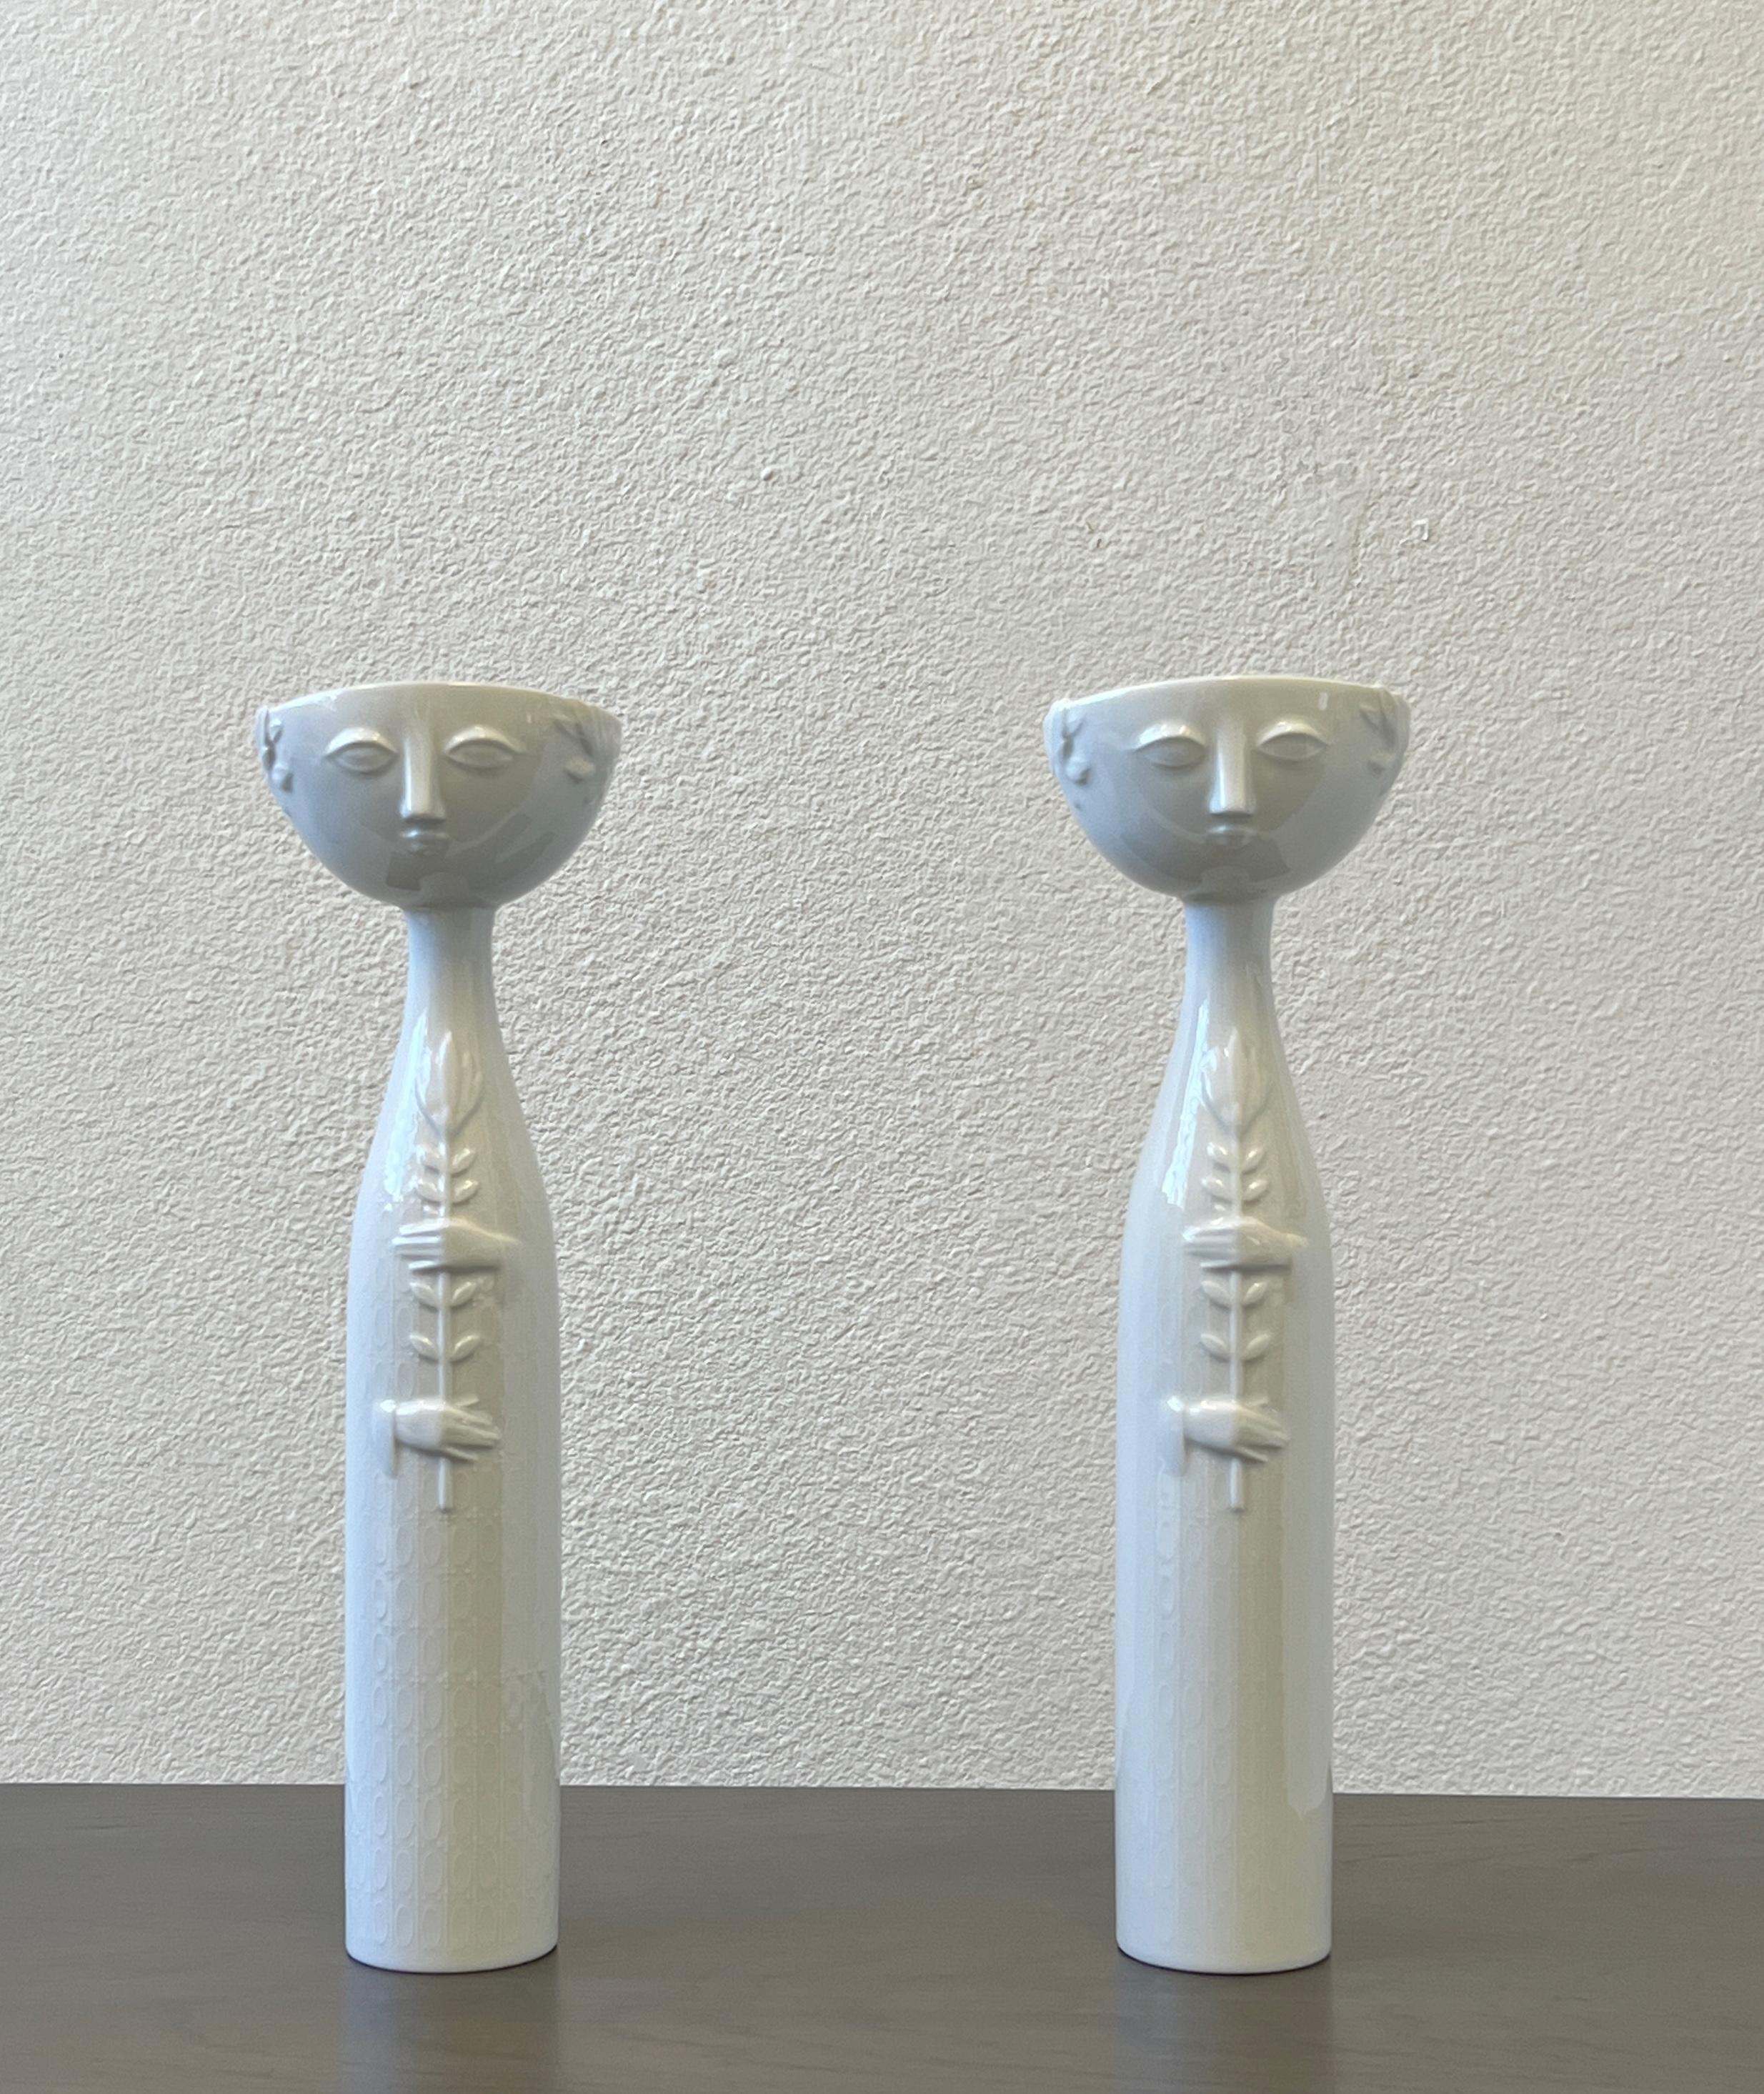 German Pair of White Porcelain Eva Candle Holders by Bijorn Wiinblad for Rosenthal 